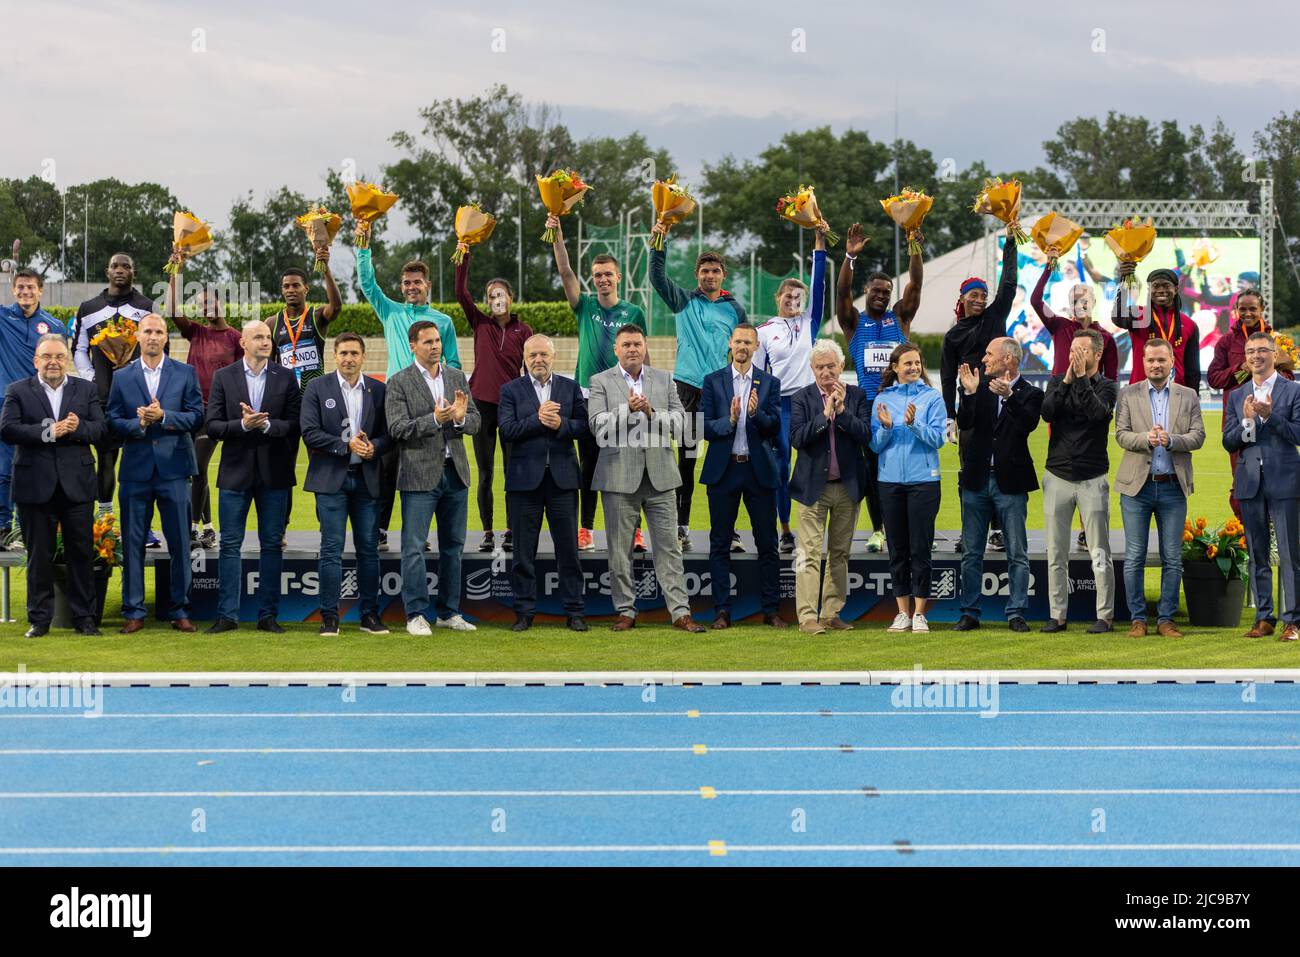 Winning athletes at the P-T-S athletics meeting in the sports site of x-bionic sphere® in Šamorín, Slovakia, 9. June 2022 Stock Photo